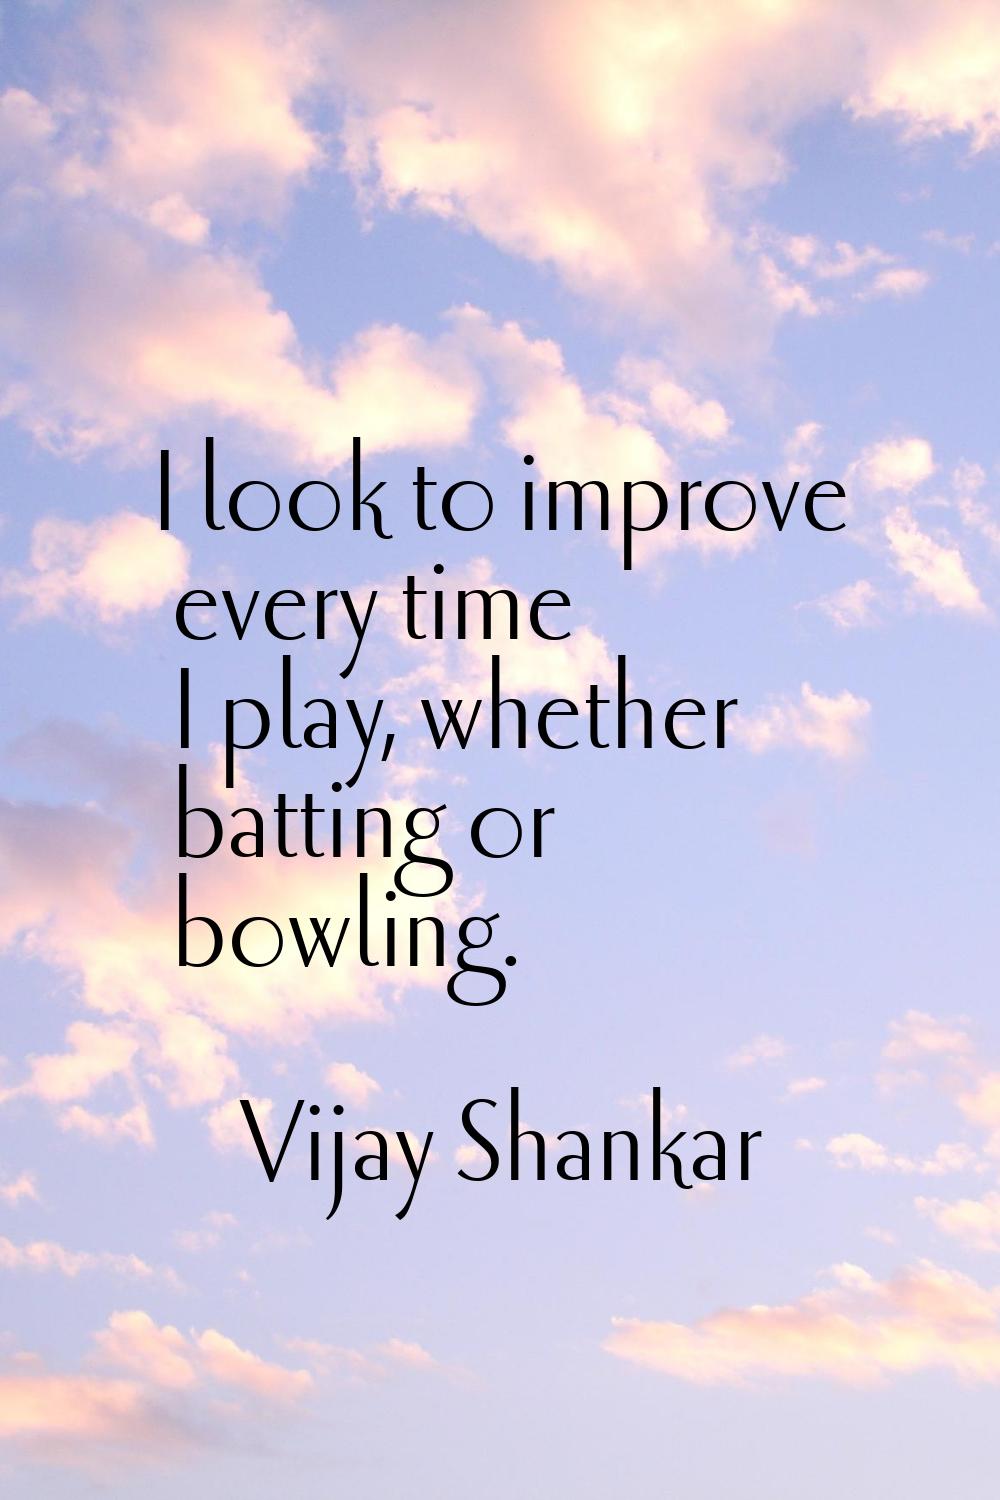 I look to improve every time I play, whether batting or bowling.